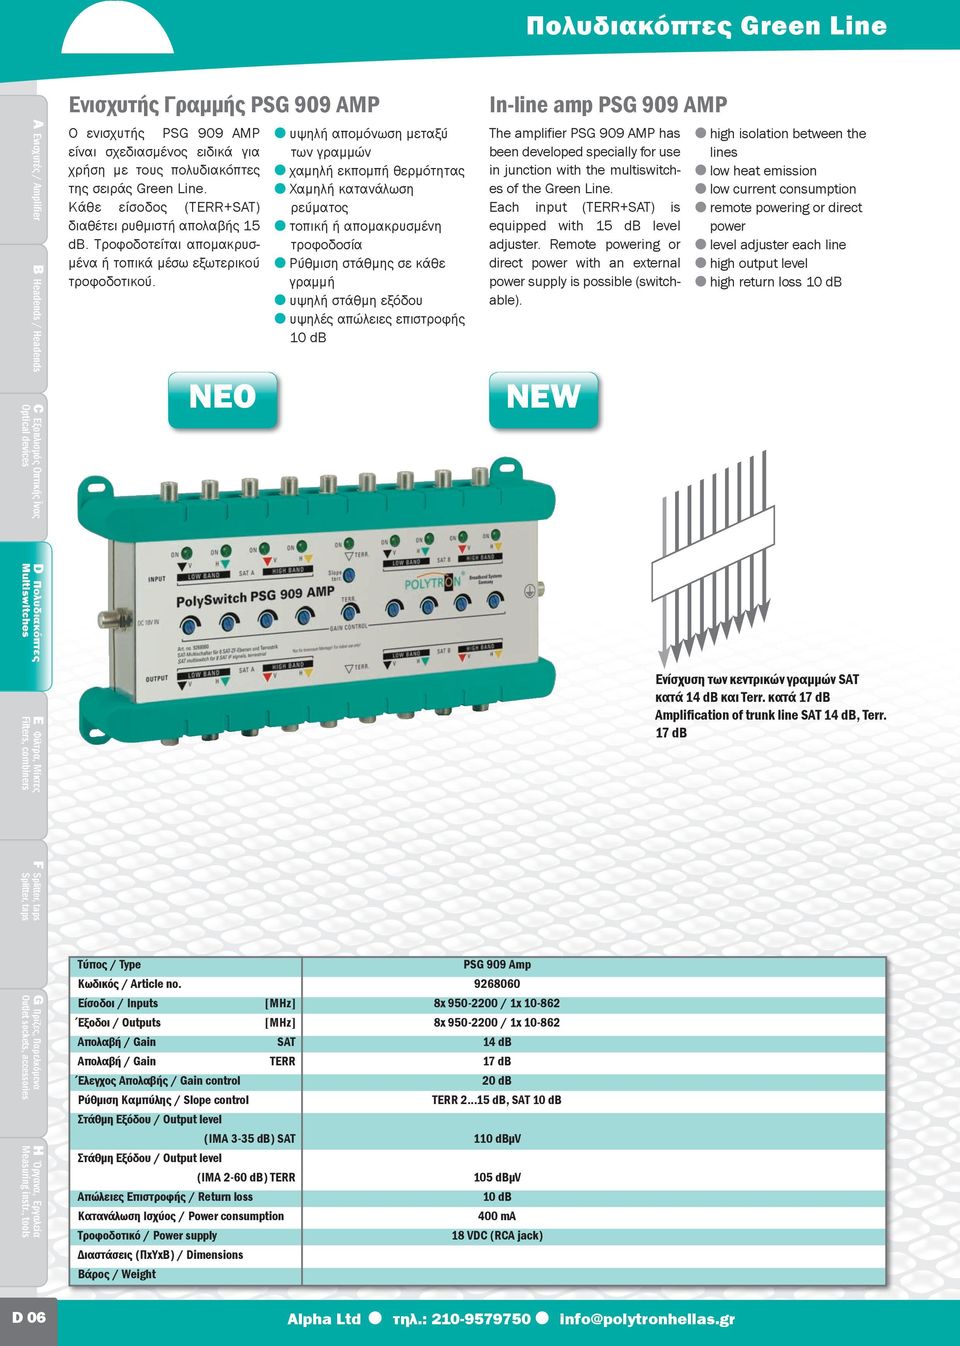 The amplifier PSG 909 MP has been developed specially for use in junction with the multiswitches of the Green Line. ach input (TRR+ST) is equipped with 15 d level adjuster.